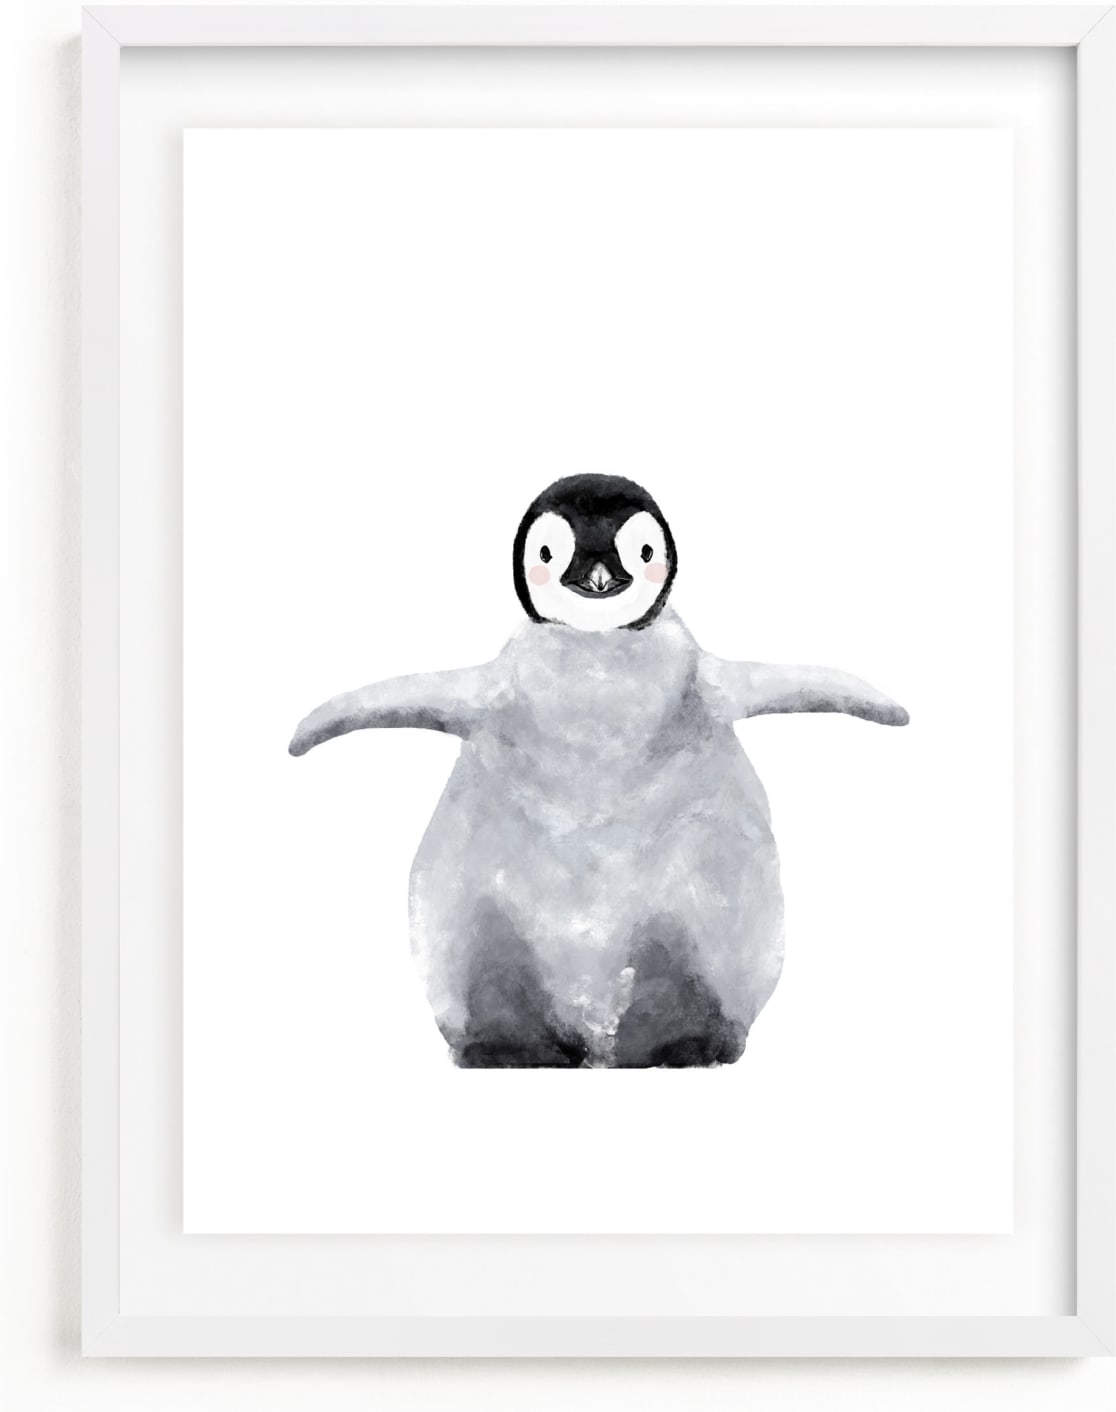 This is a grey kids wall art by Cass Loh called Baby Animal Penguin.